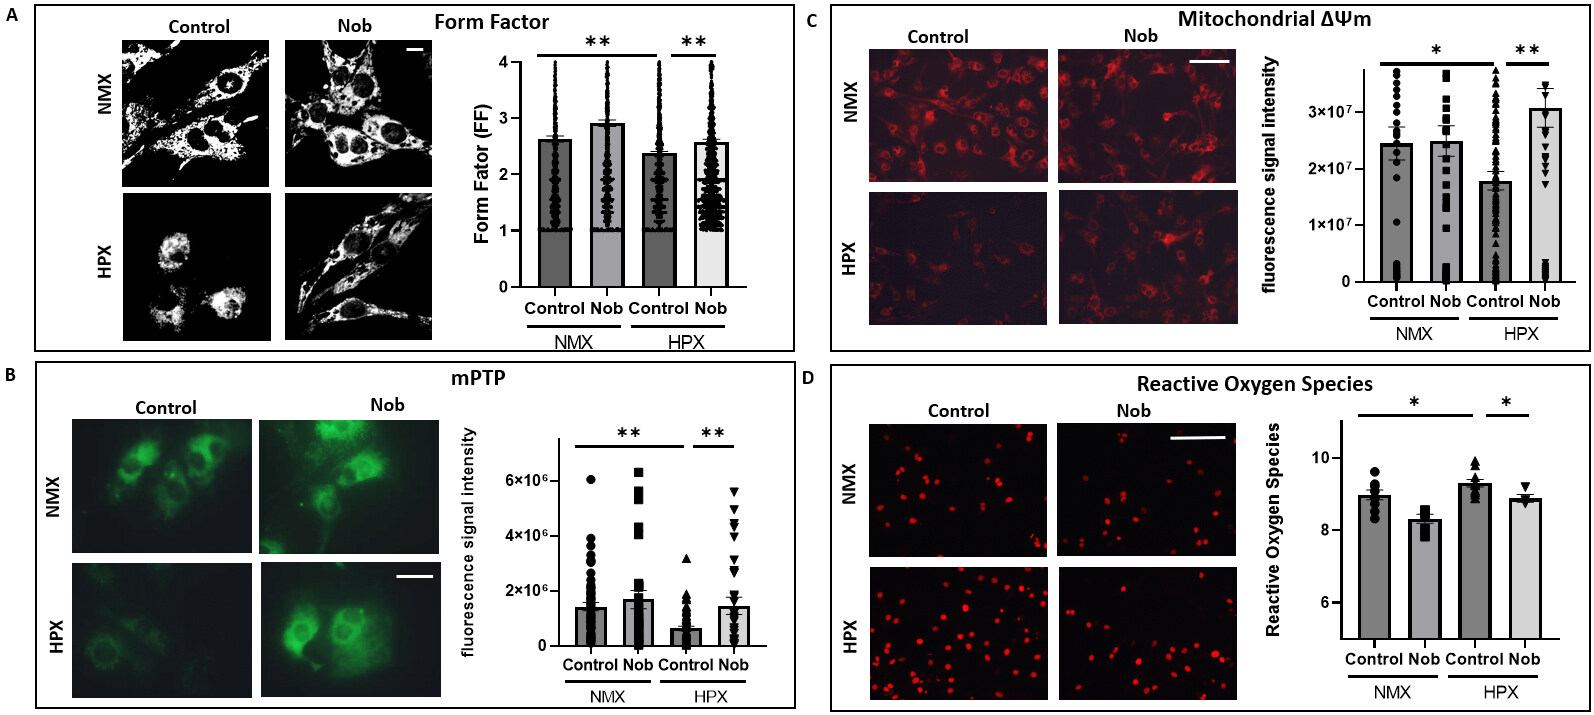 Retinoic acid-related orphan receptors regulate autophagy and cell survival in cardiac myocytes during hypoxic stress